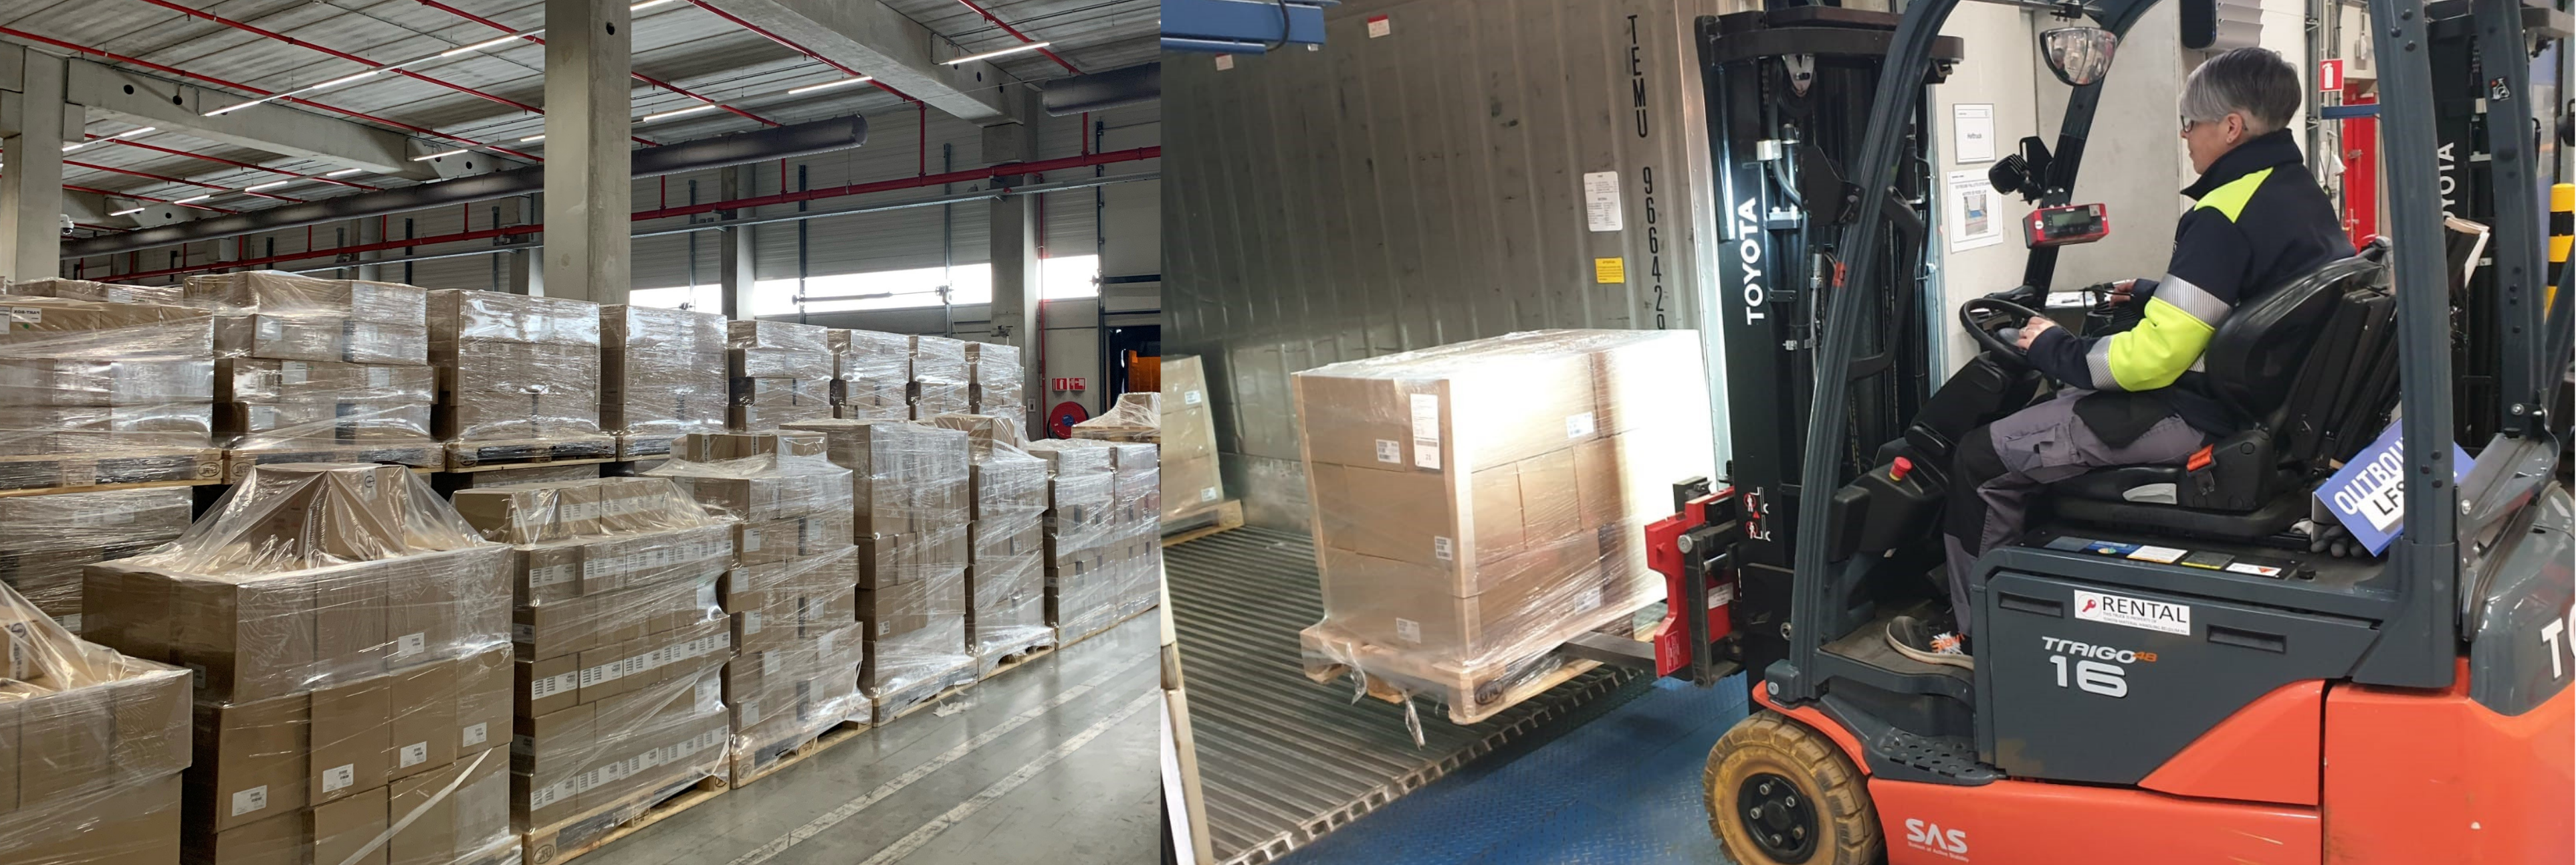 Pallets of LifeScan’s OneTouch® Blood Glucose testing supplies departing for Ukraine. The shipment includes specifically requested items such as blood glucose meters and test strips.